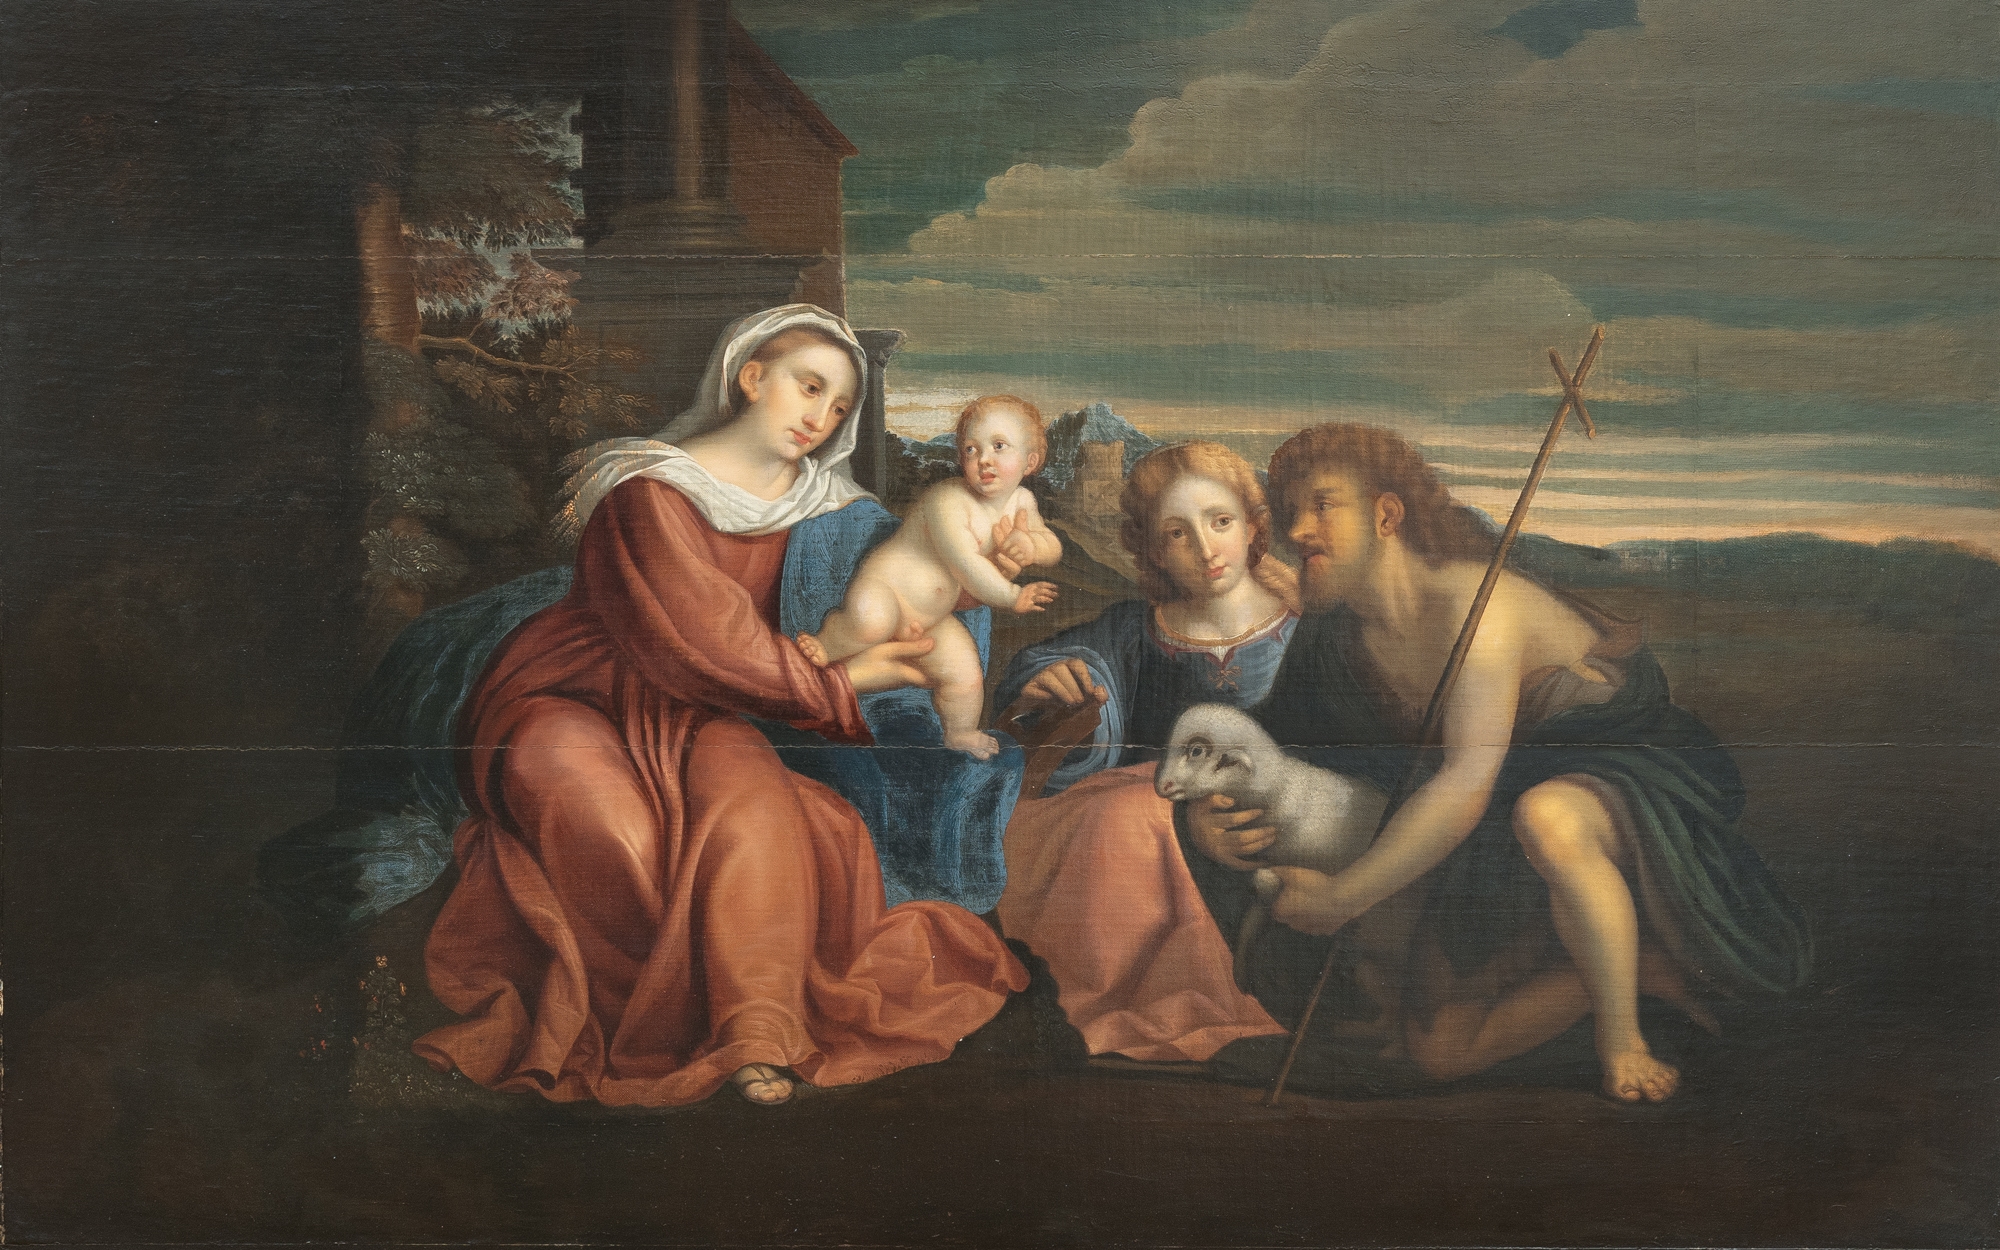 The Virgin and Child with St. Catherine of Alexandria and John the Baptist by Jacopo Palma il Vecchio